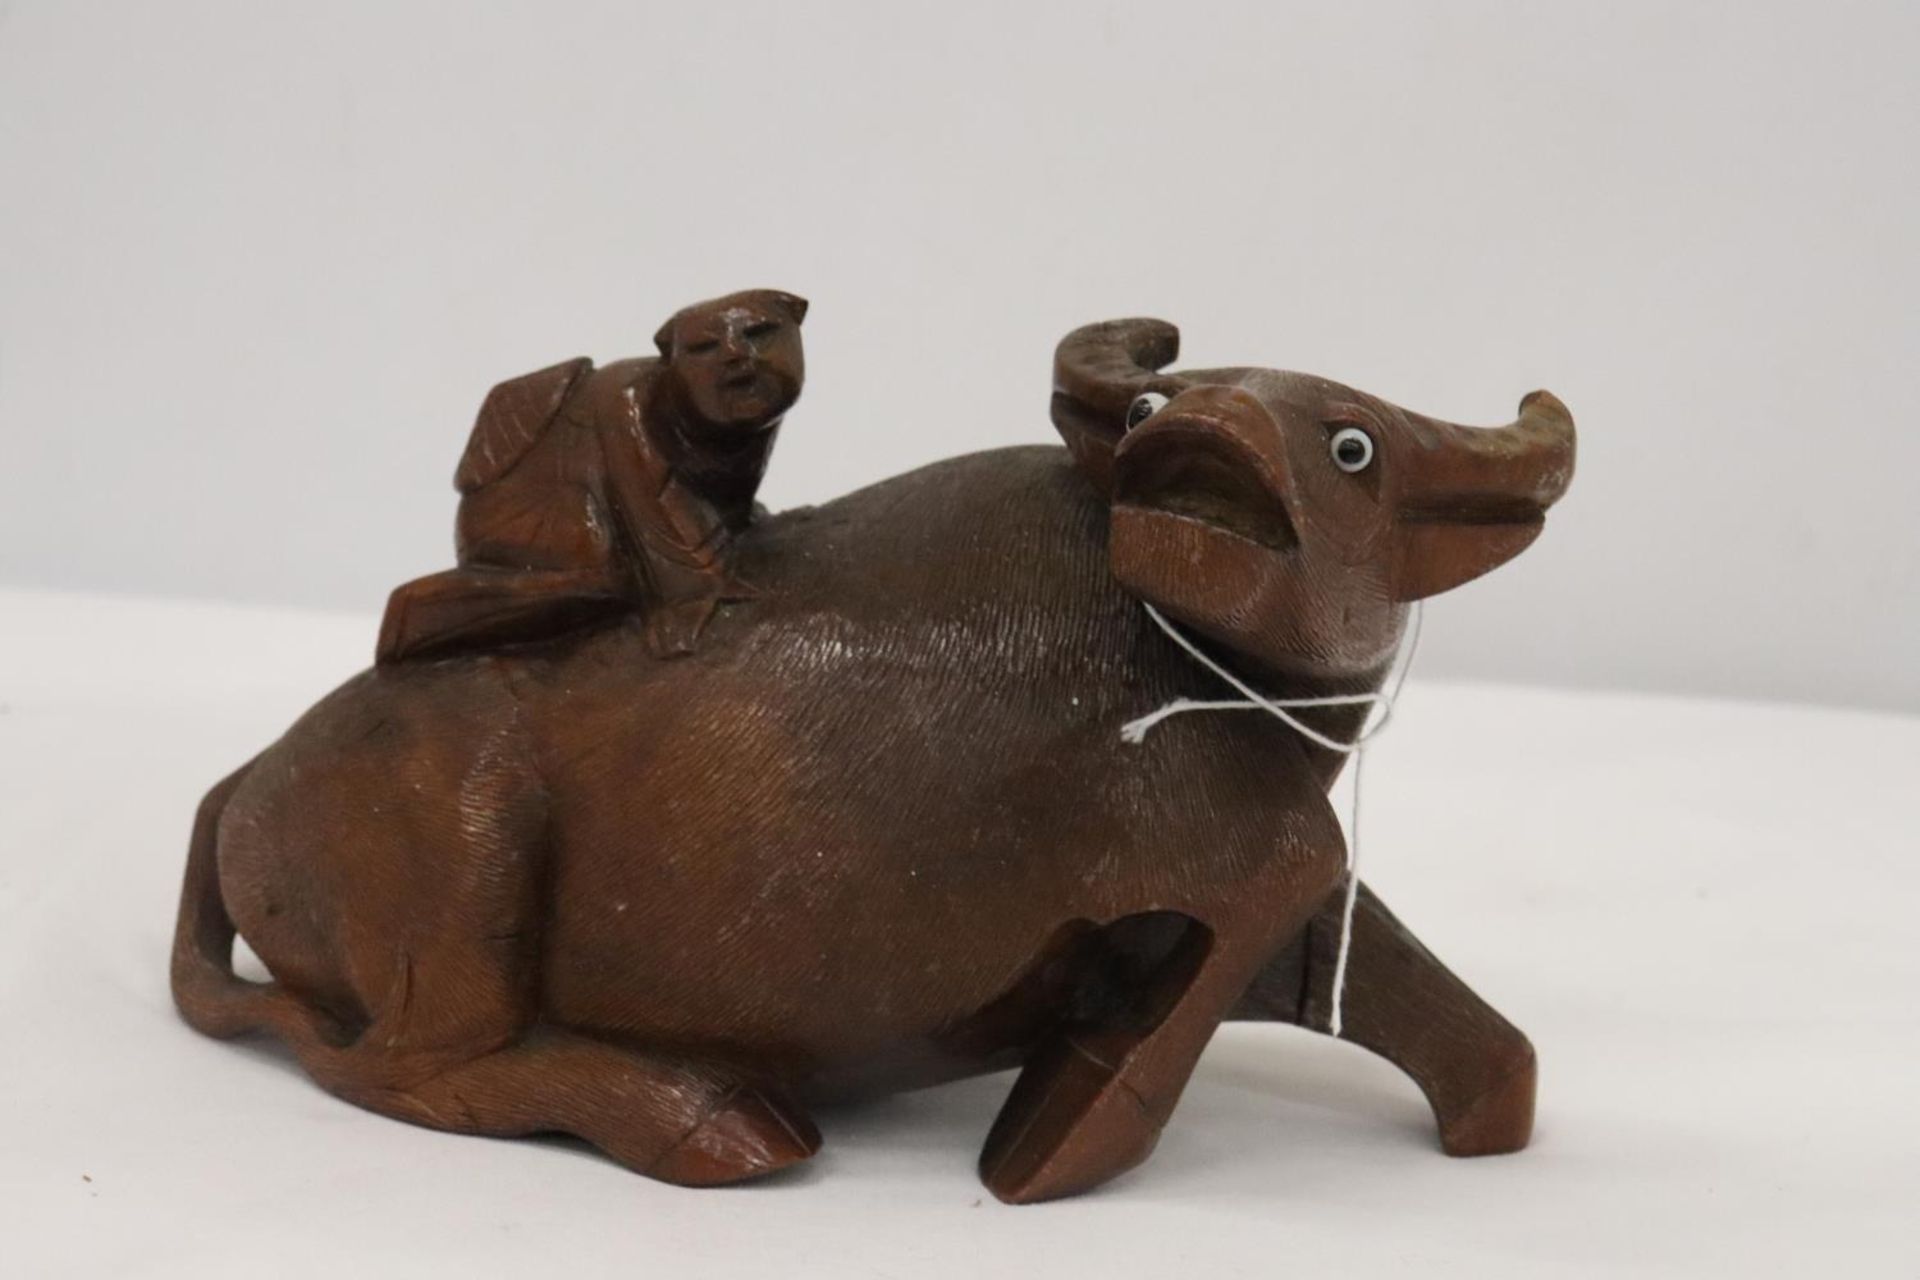 AN ORIENTAL WOODEN CARVED WATER BUFFALO WITH CHILD RIDER, A/F TO LEG, HEIGHT 12CM, LENGTH 22CM